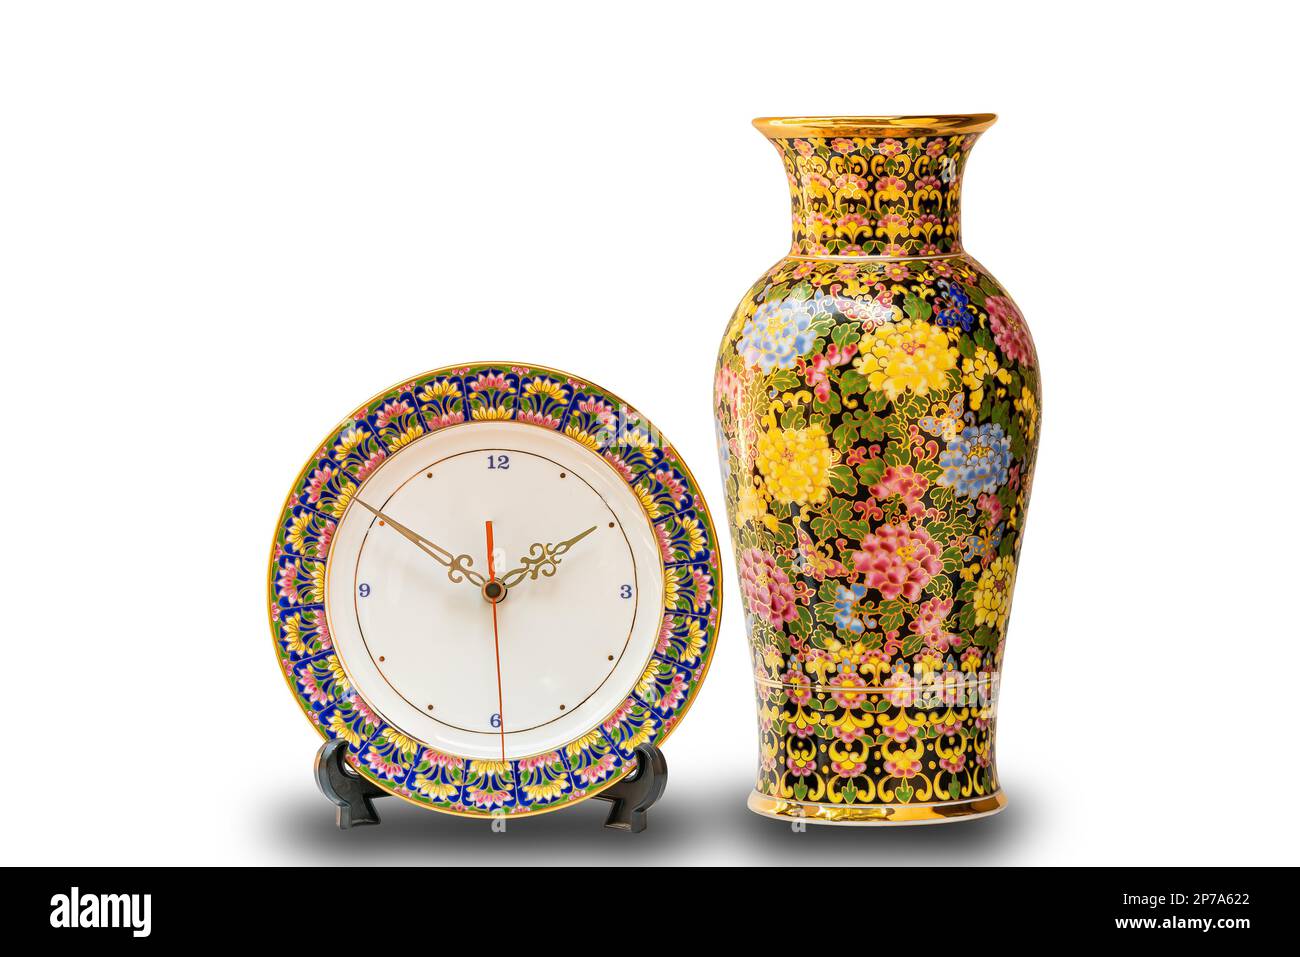 Beautiful Benjarong clock and vase on white background with clipping path. Benjarong, Thai style porcelain design in five colors. The precious Stock Photo